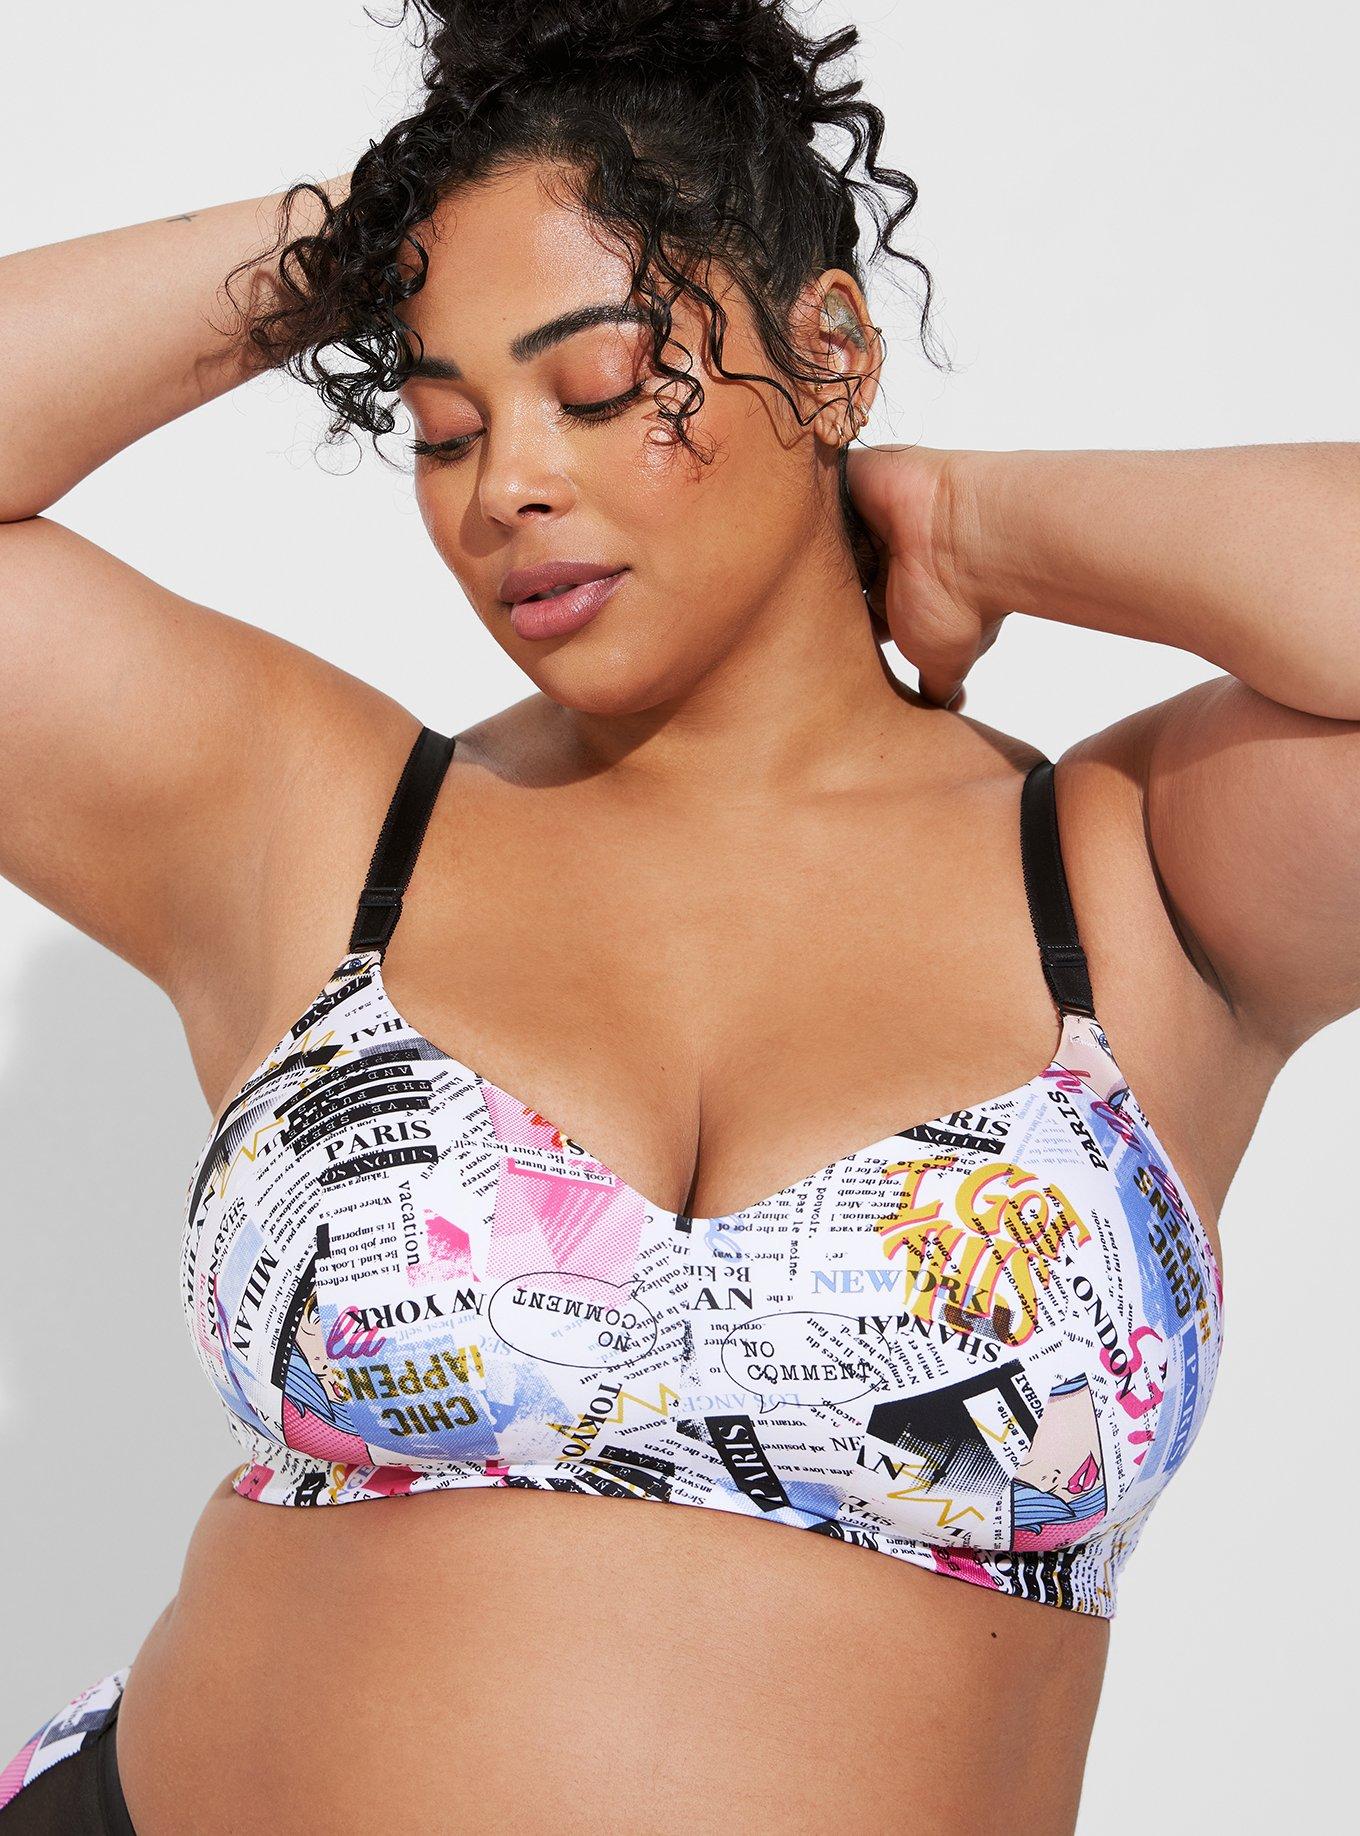 THE BEST PLUS-SIZE BRAS EVER!!! *HONEST REVIEW* TORRID Bras Try-on